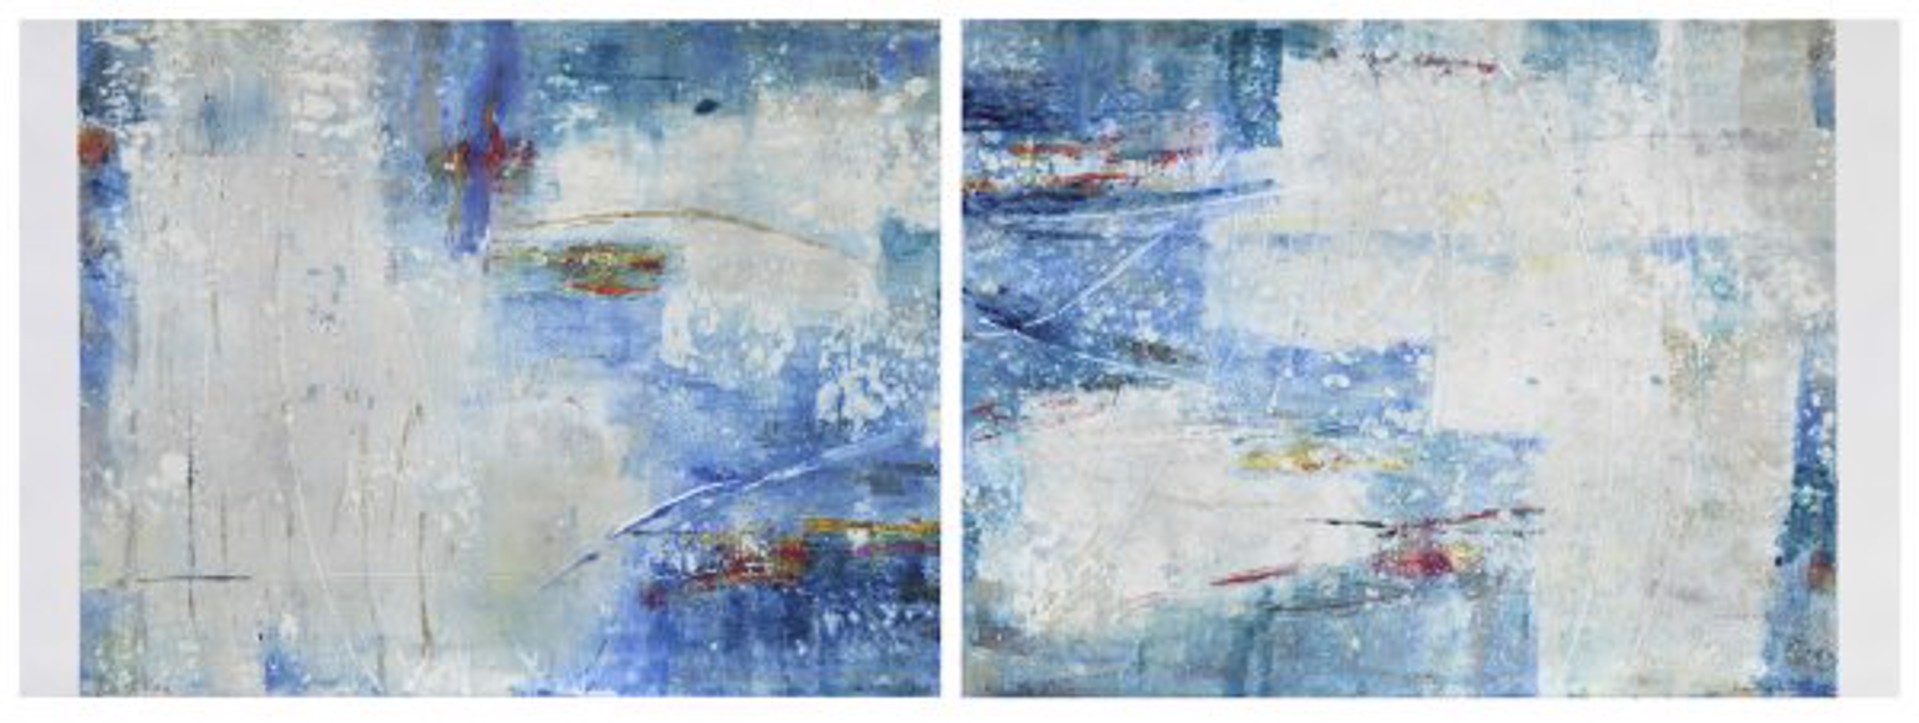 Ride The Wave A And B Diptych by Linda Whittemore